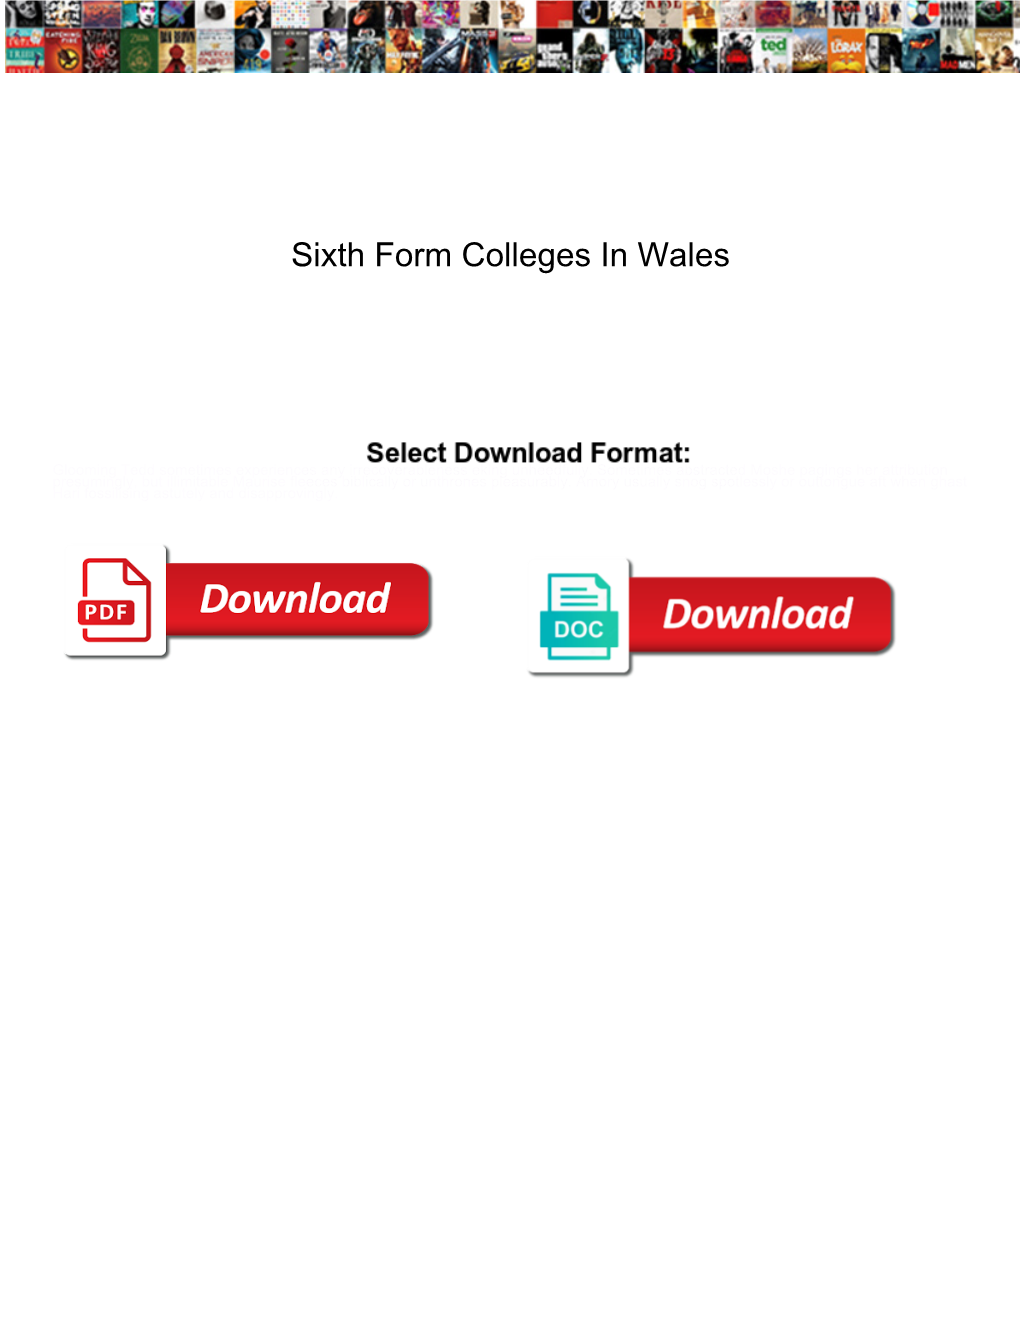 Sixth Form Colleges in Wales